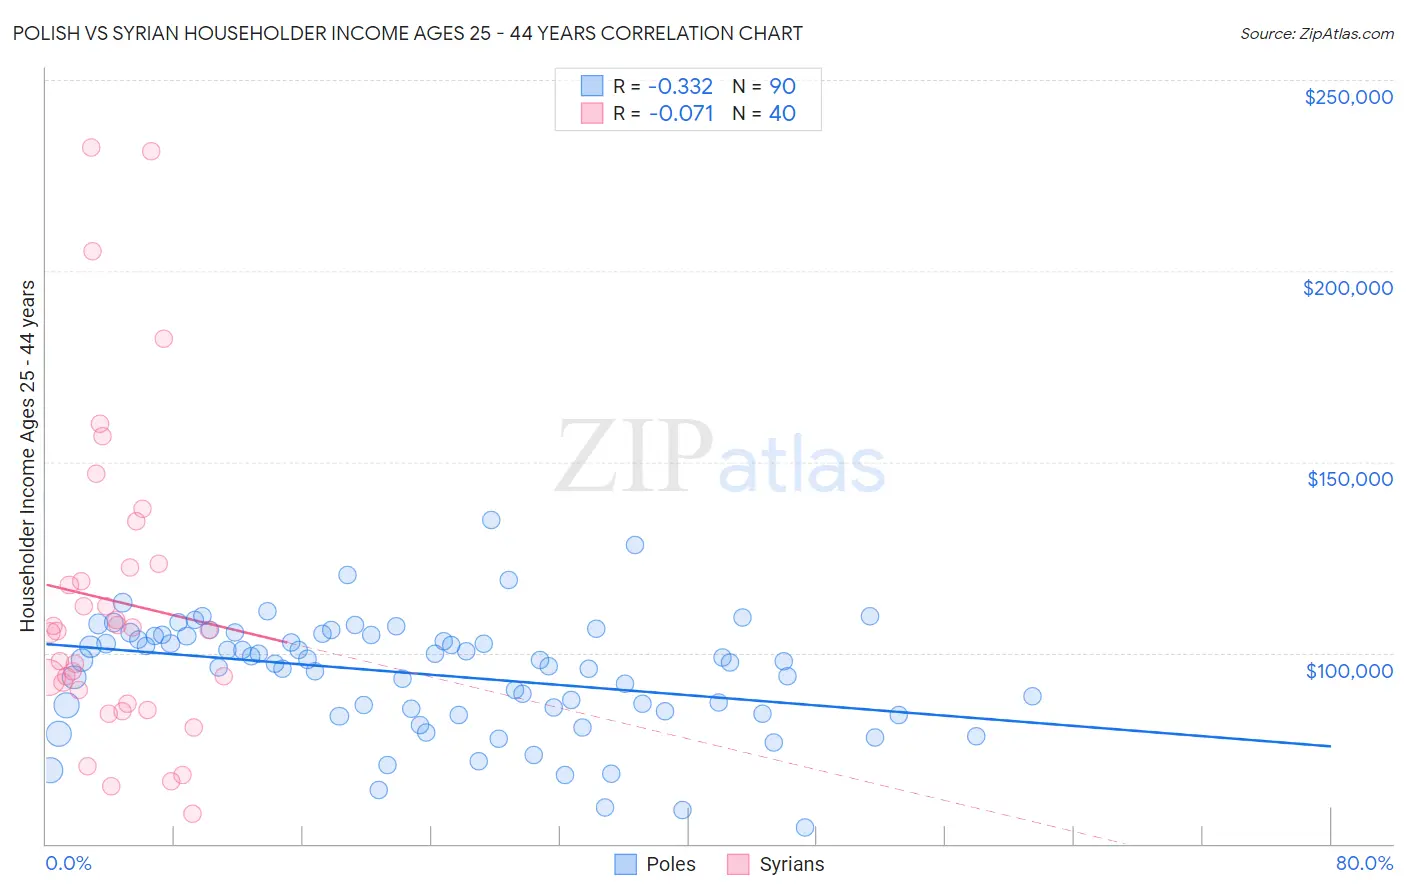 Polish vs Syrian Householder Income Ages 25 - 44 years